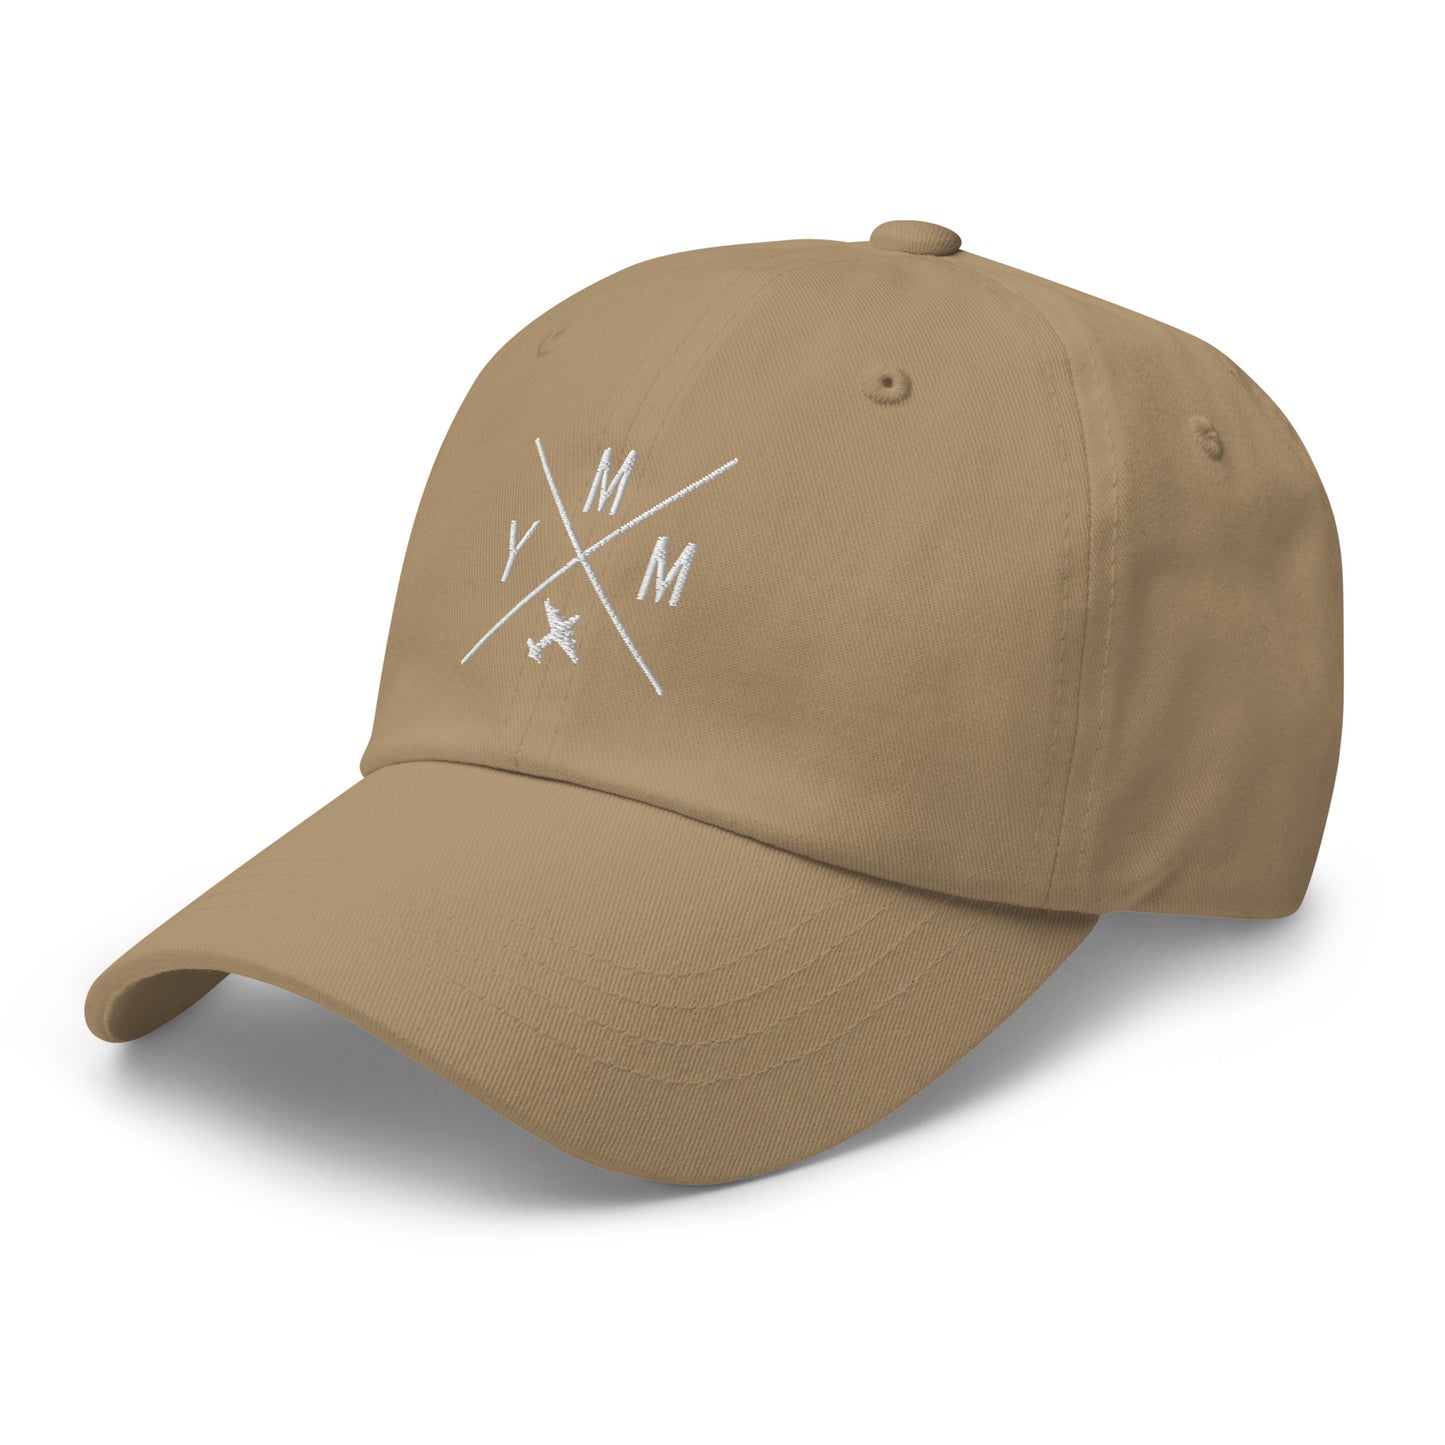 Crossed-X Dad Hat - White • YMM Fort McMurray • YHM Designs - Image 17